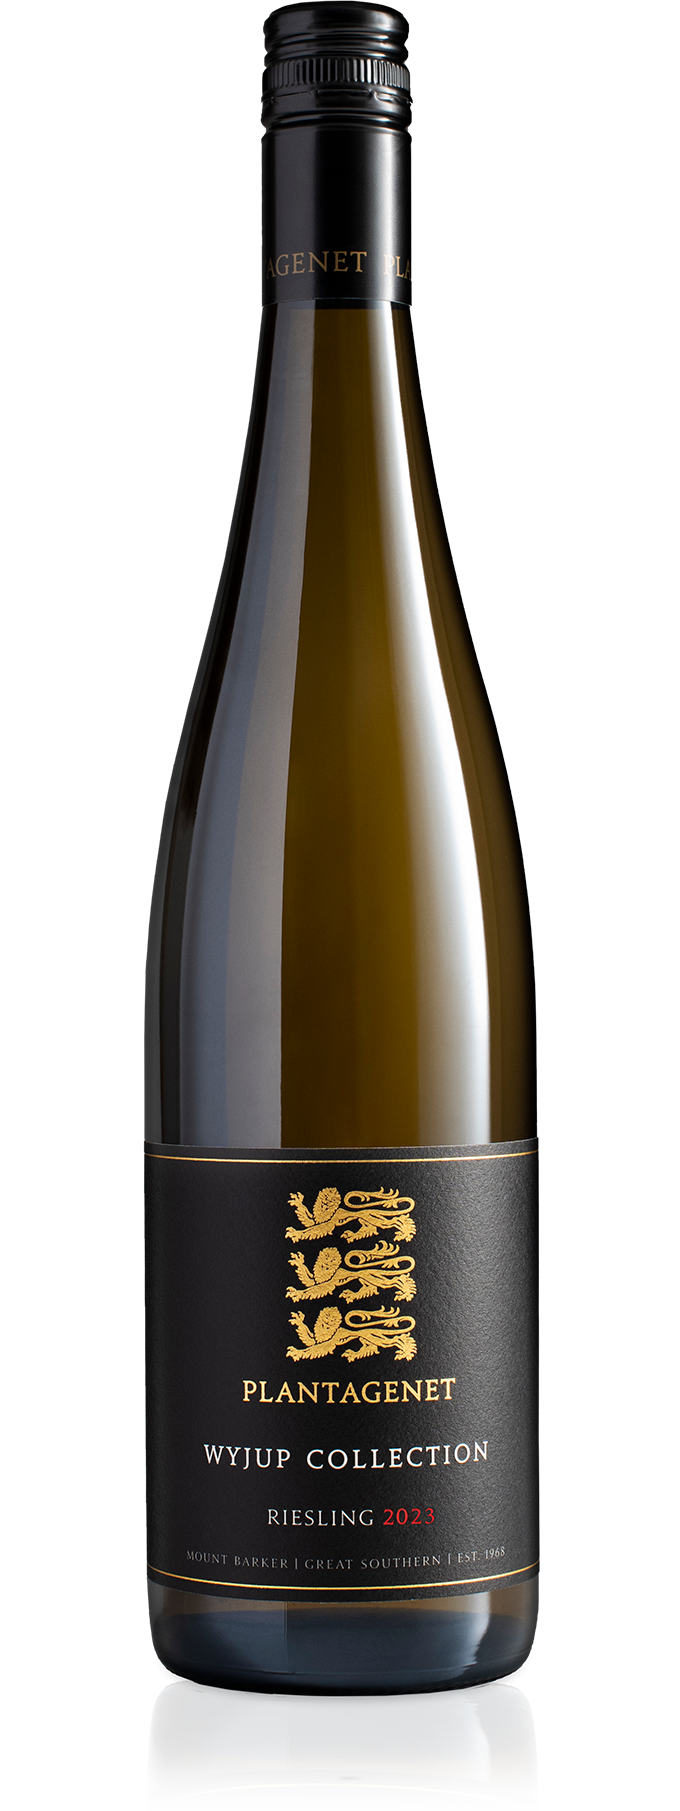 Plantagenet Wyjup Collection riesling 2023